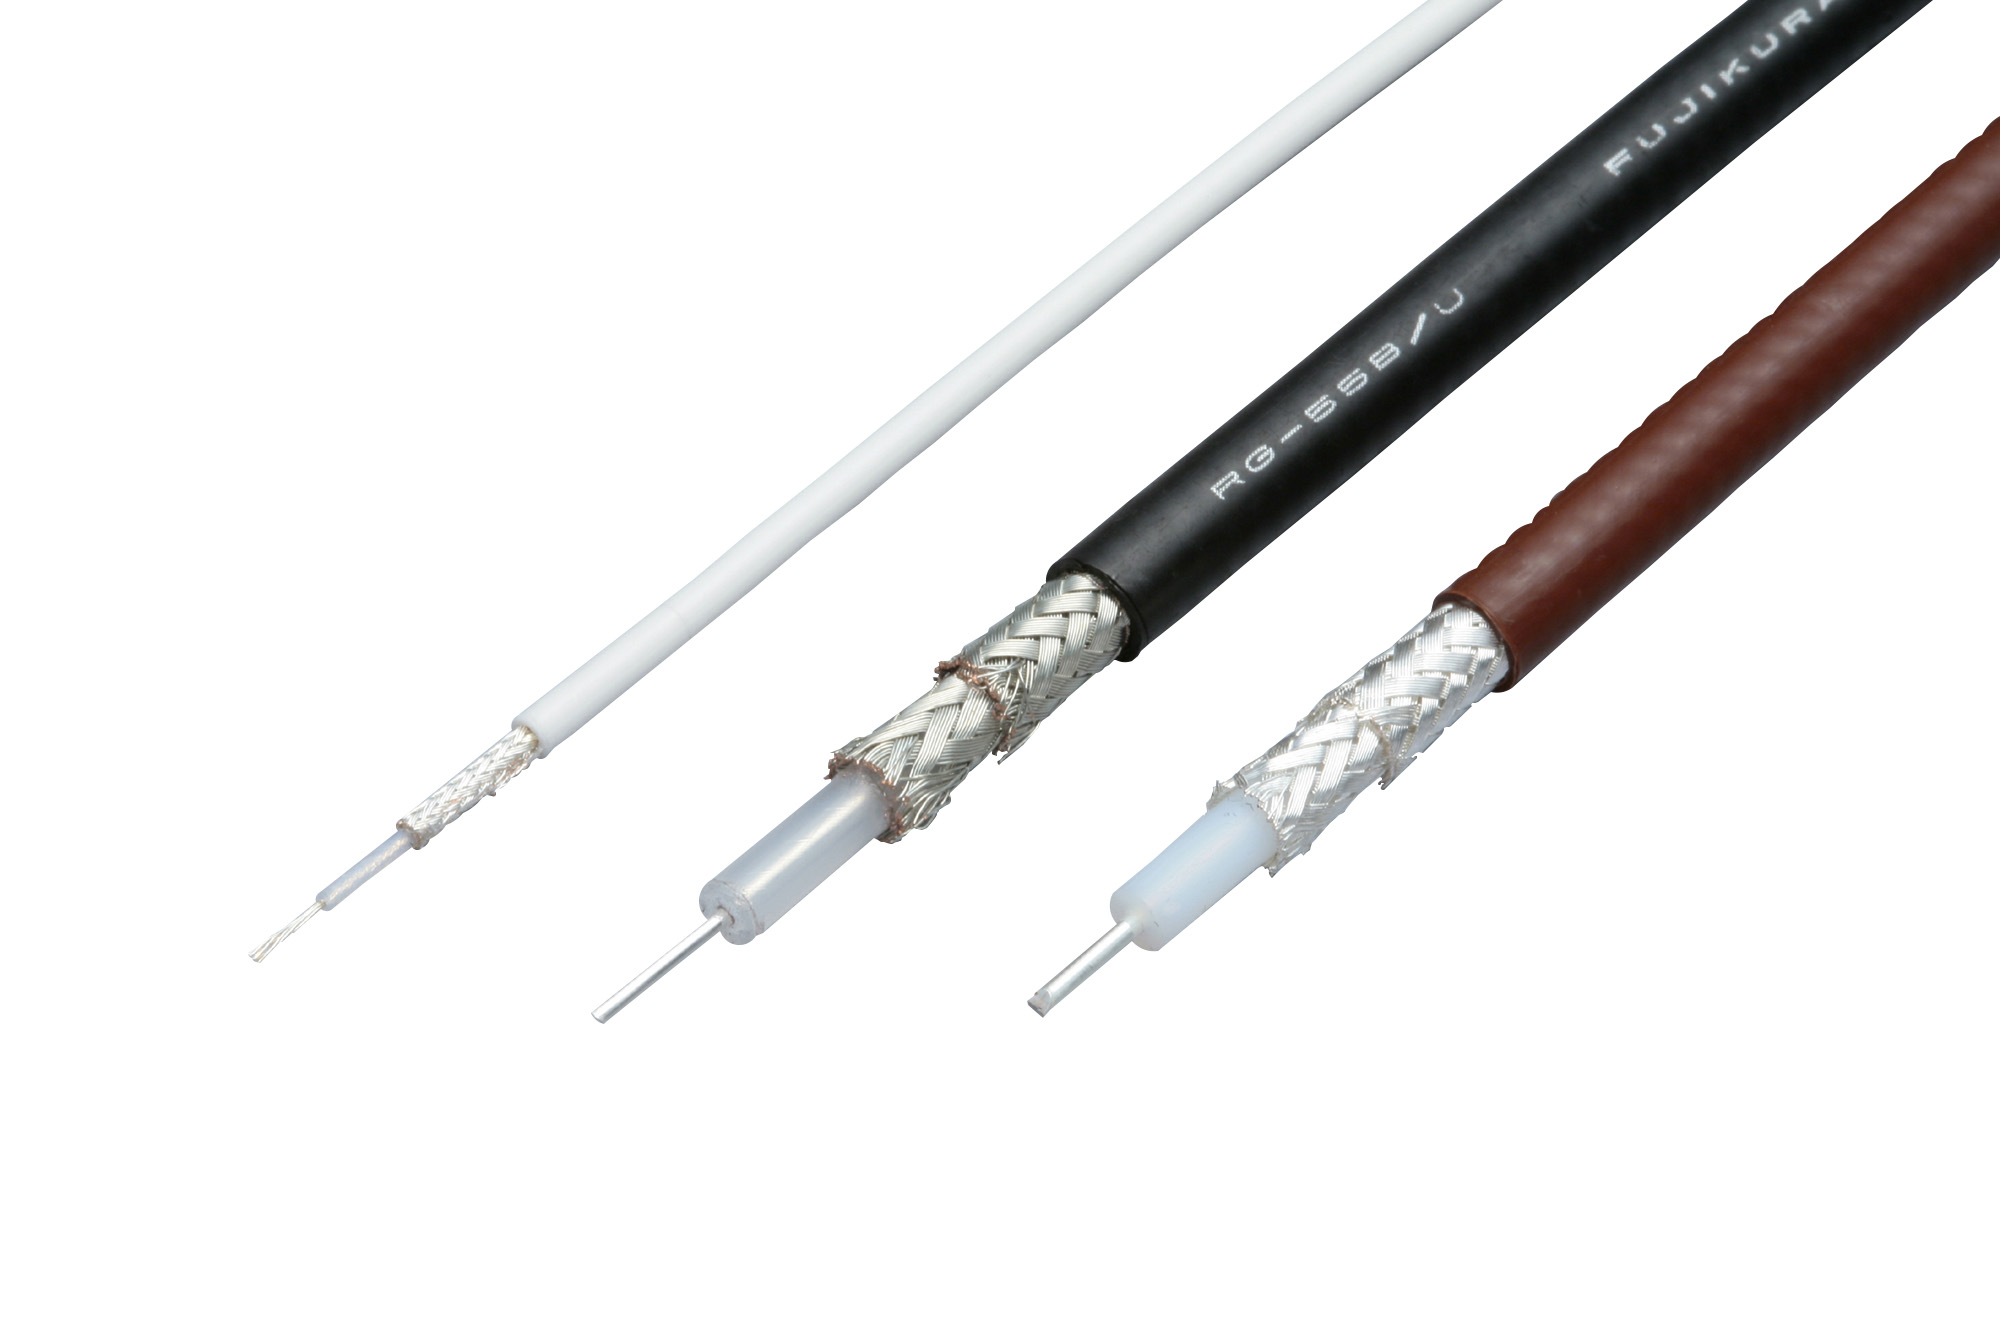 RG Type High Frequency Coaxial Cable (RG-58AU-100) 